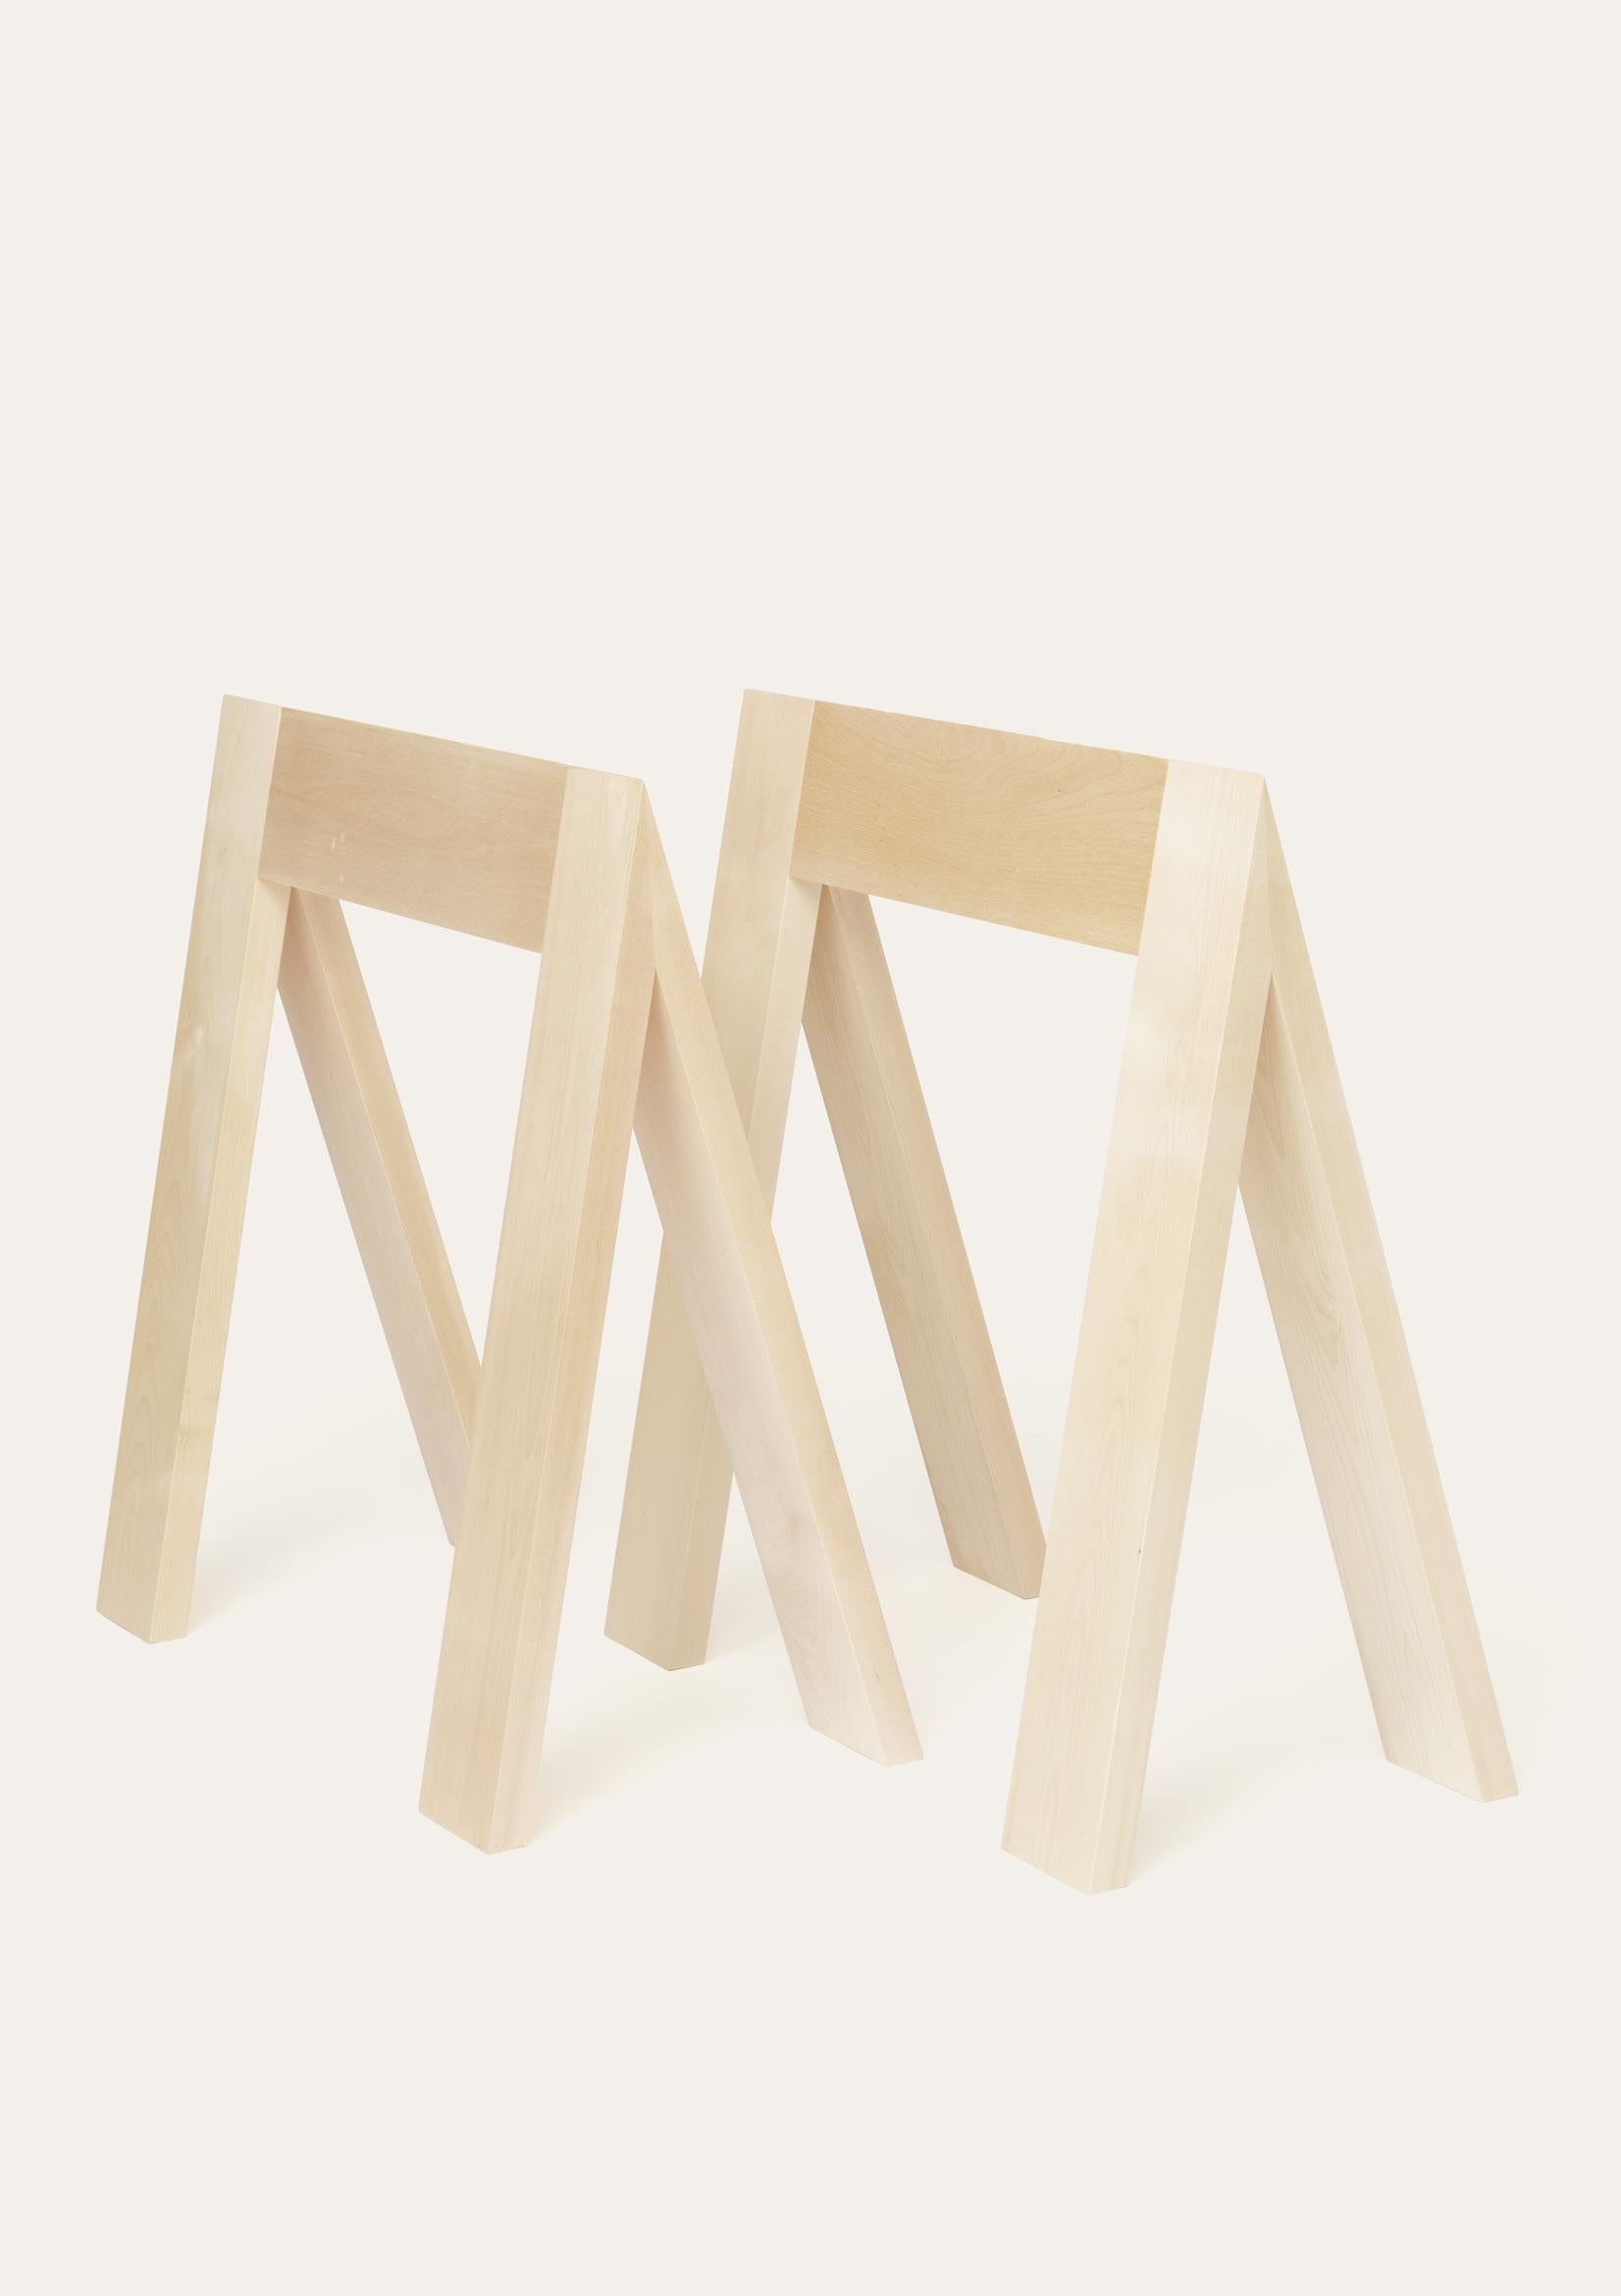 Set of 2 Bock birch trestles by Storängen Design
Dimensions: D 34 x W 80 x H 70 cm
Materials: birch wood.
Marble, glass or birch tabletop available on request.

A modern support for your tabletop. Trestles can be a both beautiful and versatile